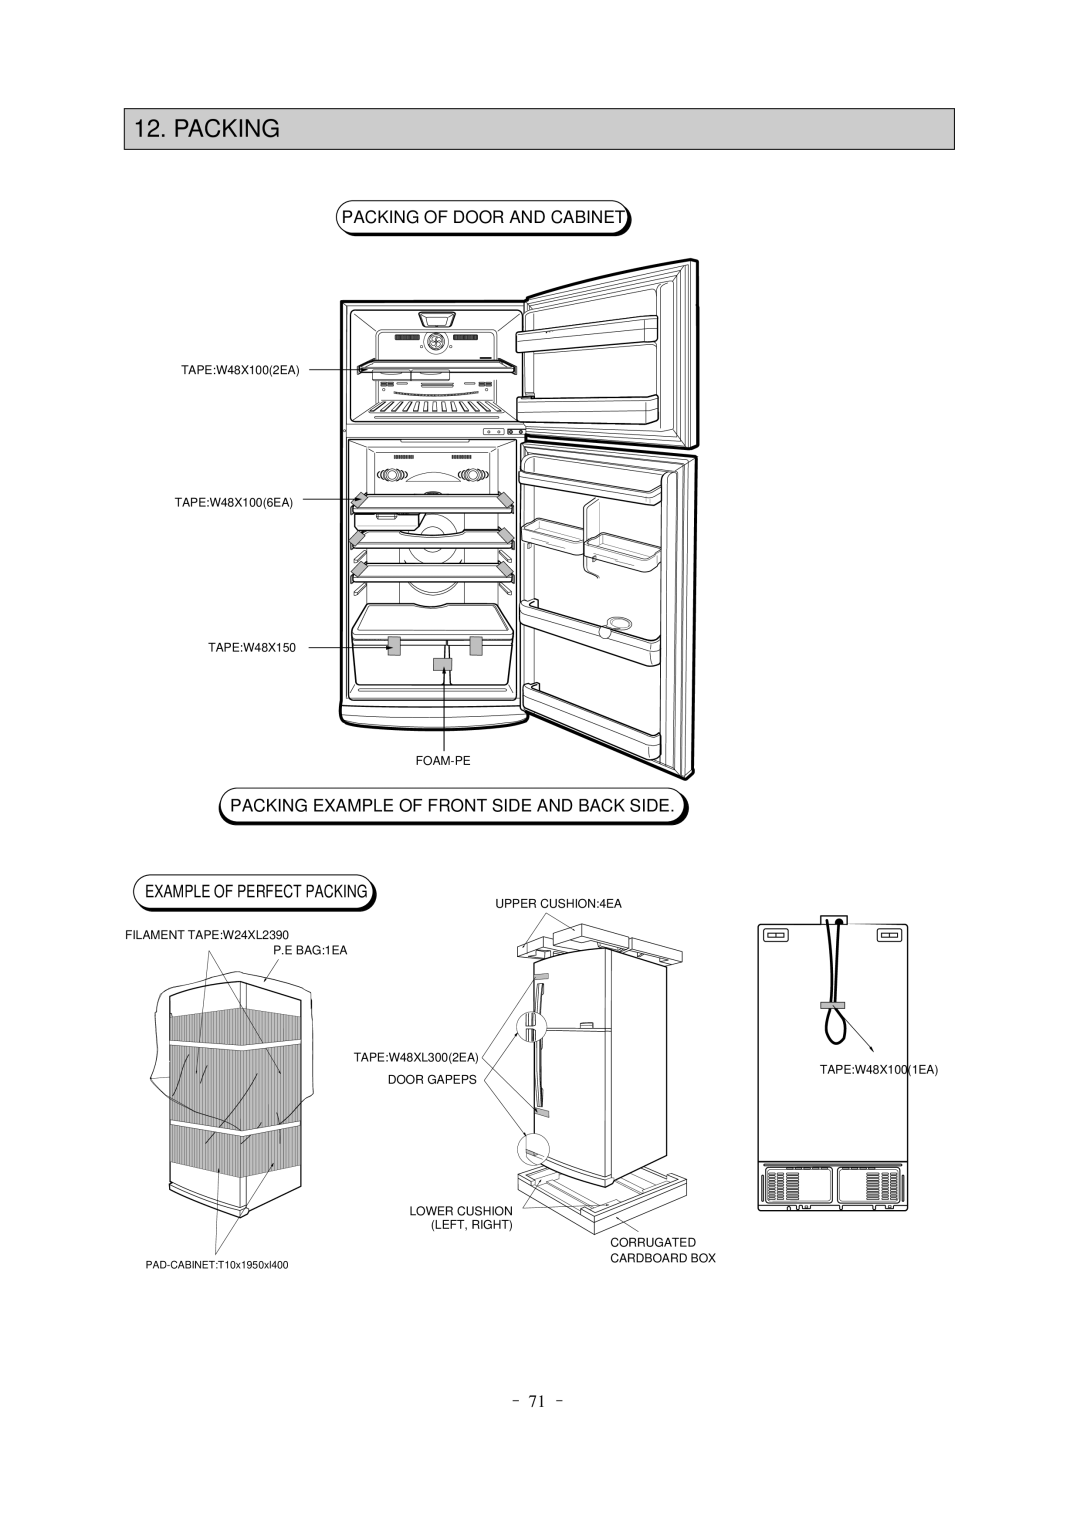 Samsung SR-65NMC Packing Of Door And Cabinet, Packing Example Of Front Side And Back Side, Example Of Perfect Packing 